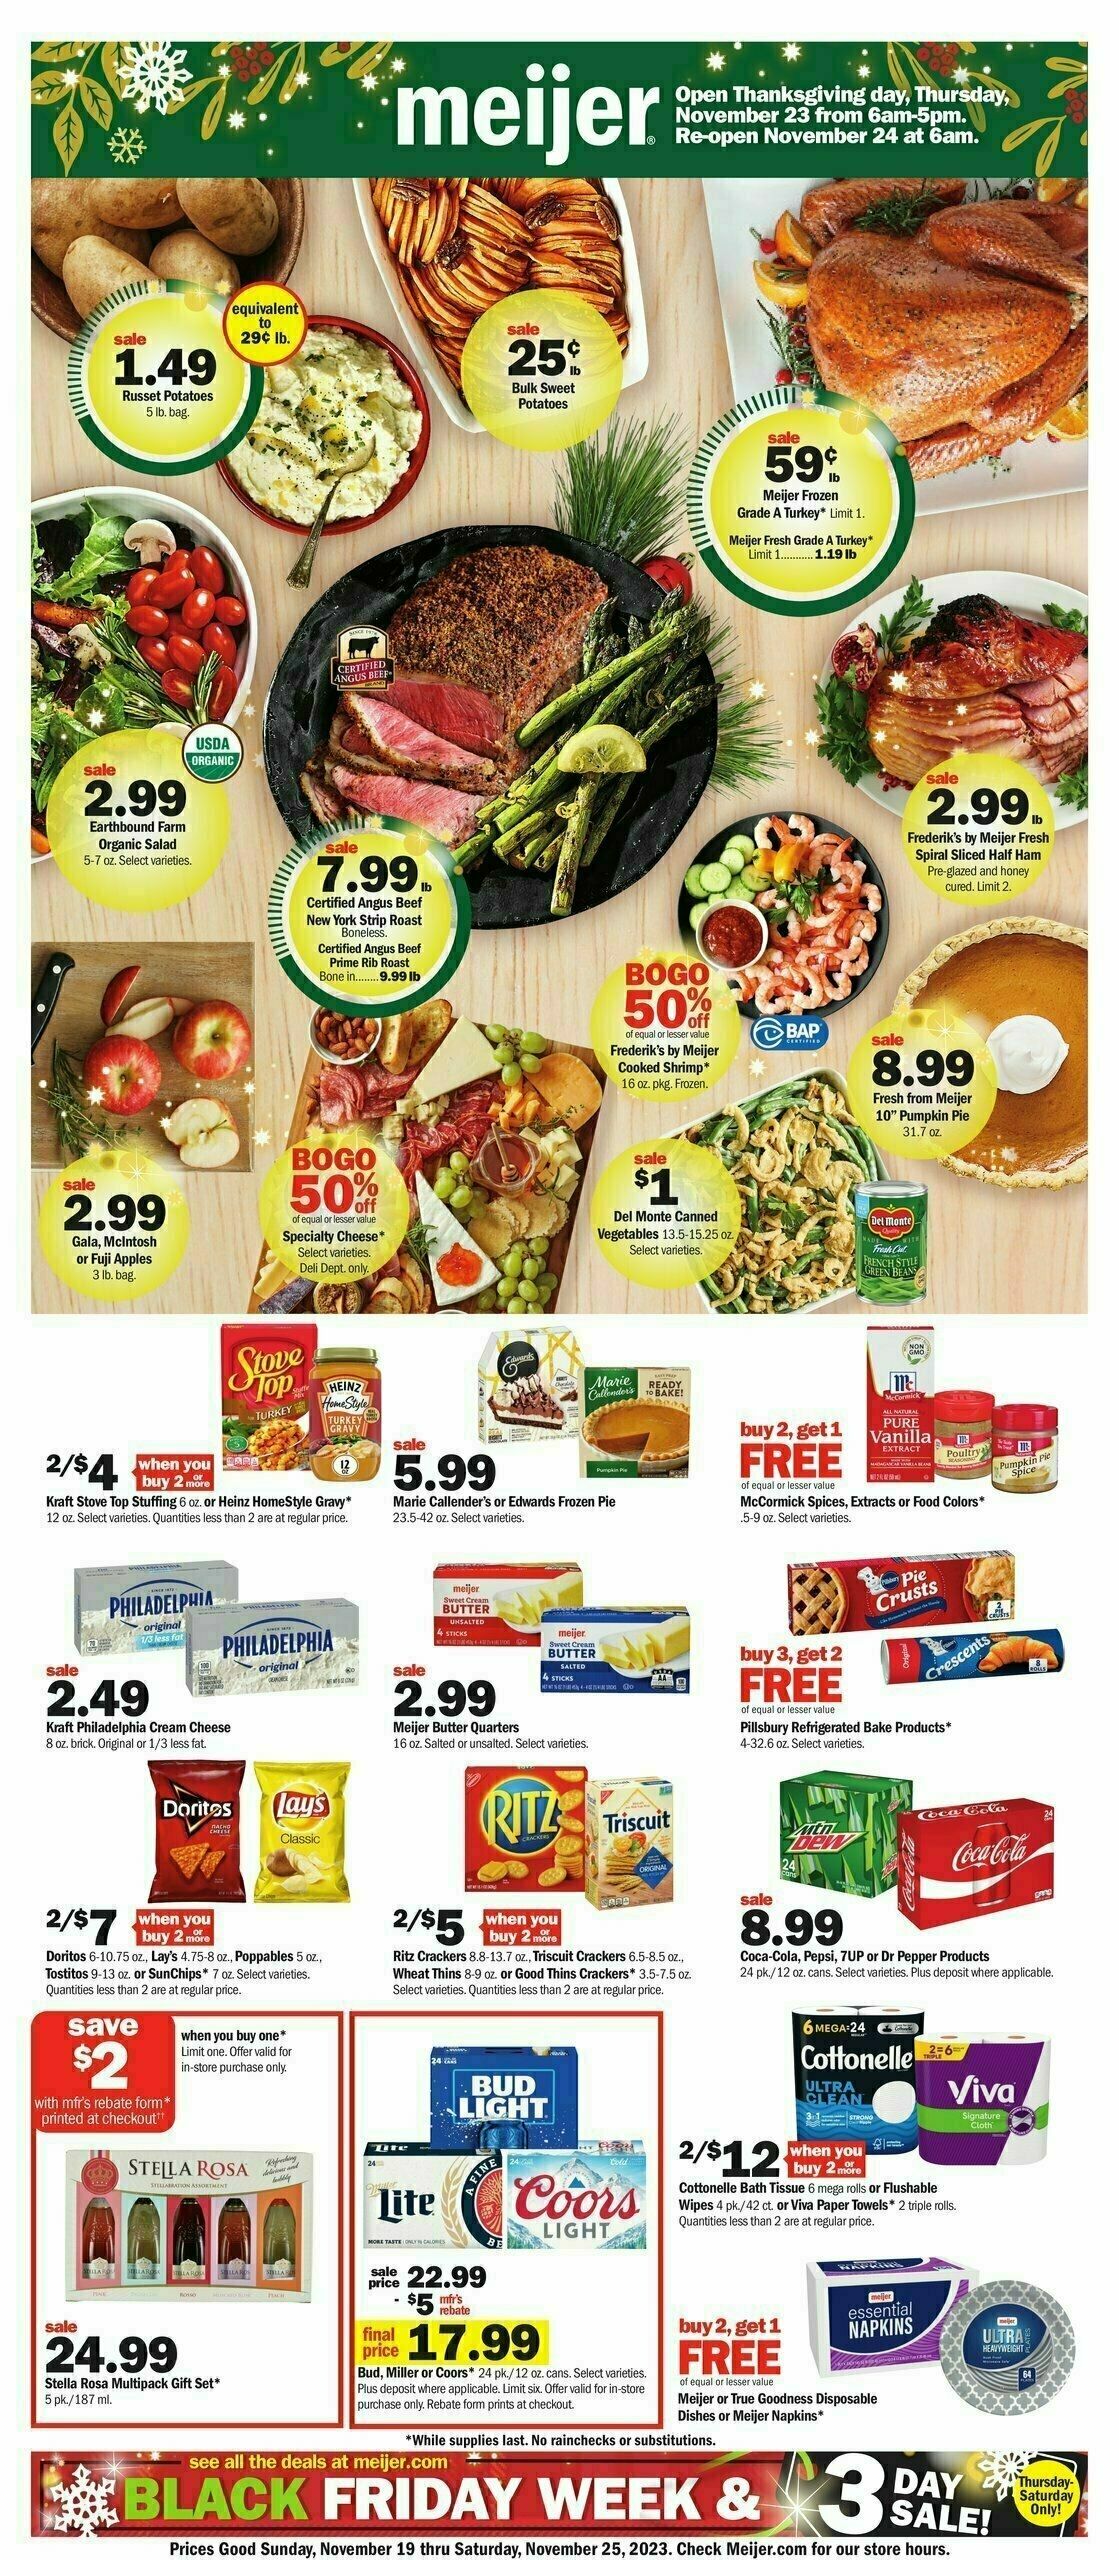 Meijer Weekly Ad from November 19